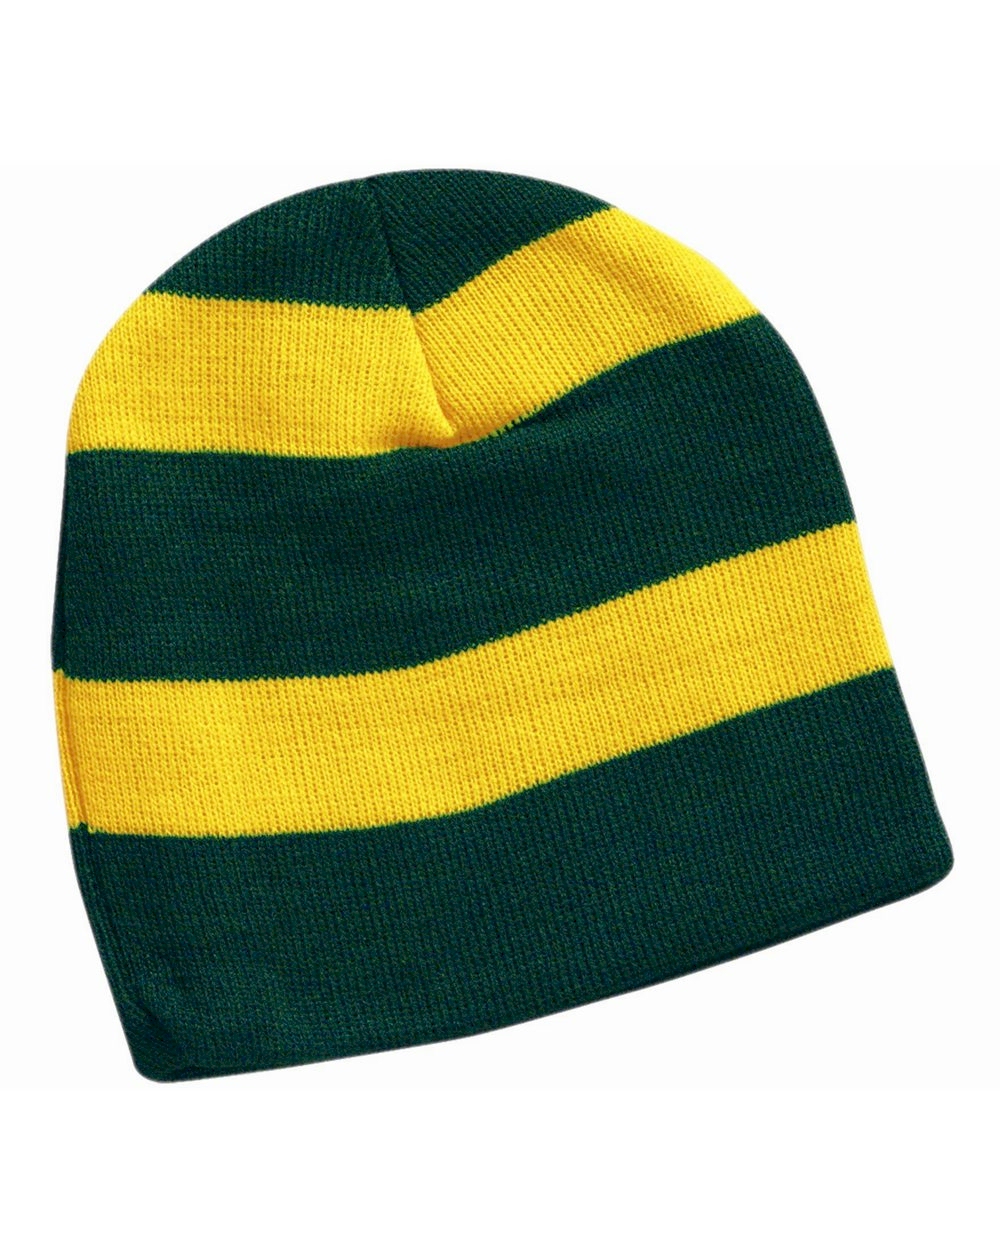 Rugby Striped Knit Beanie Embroidery Blanks - Forest/Gold